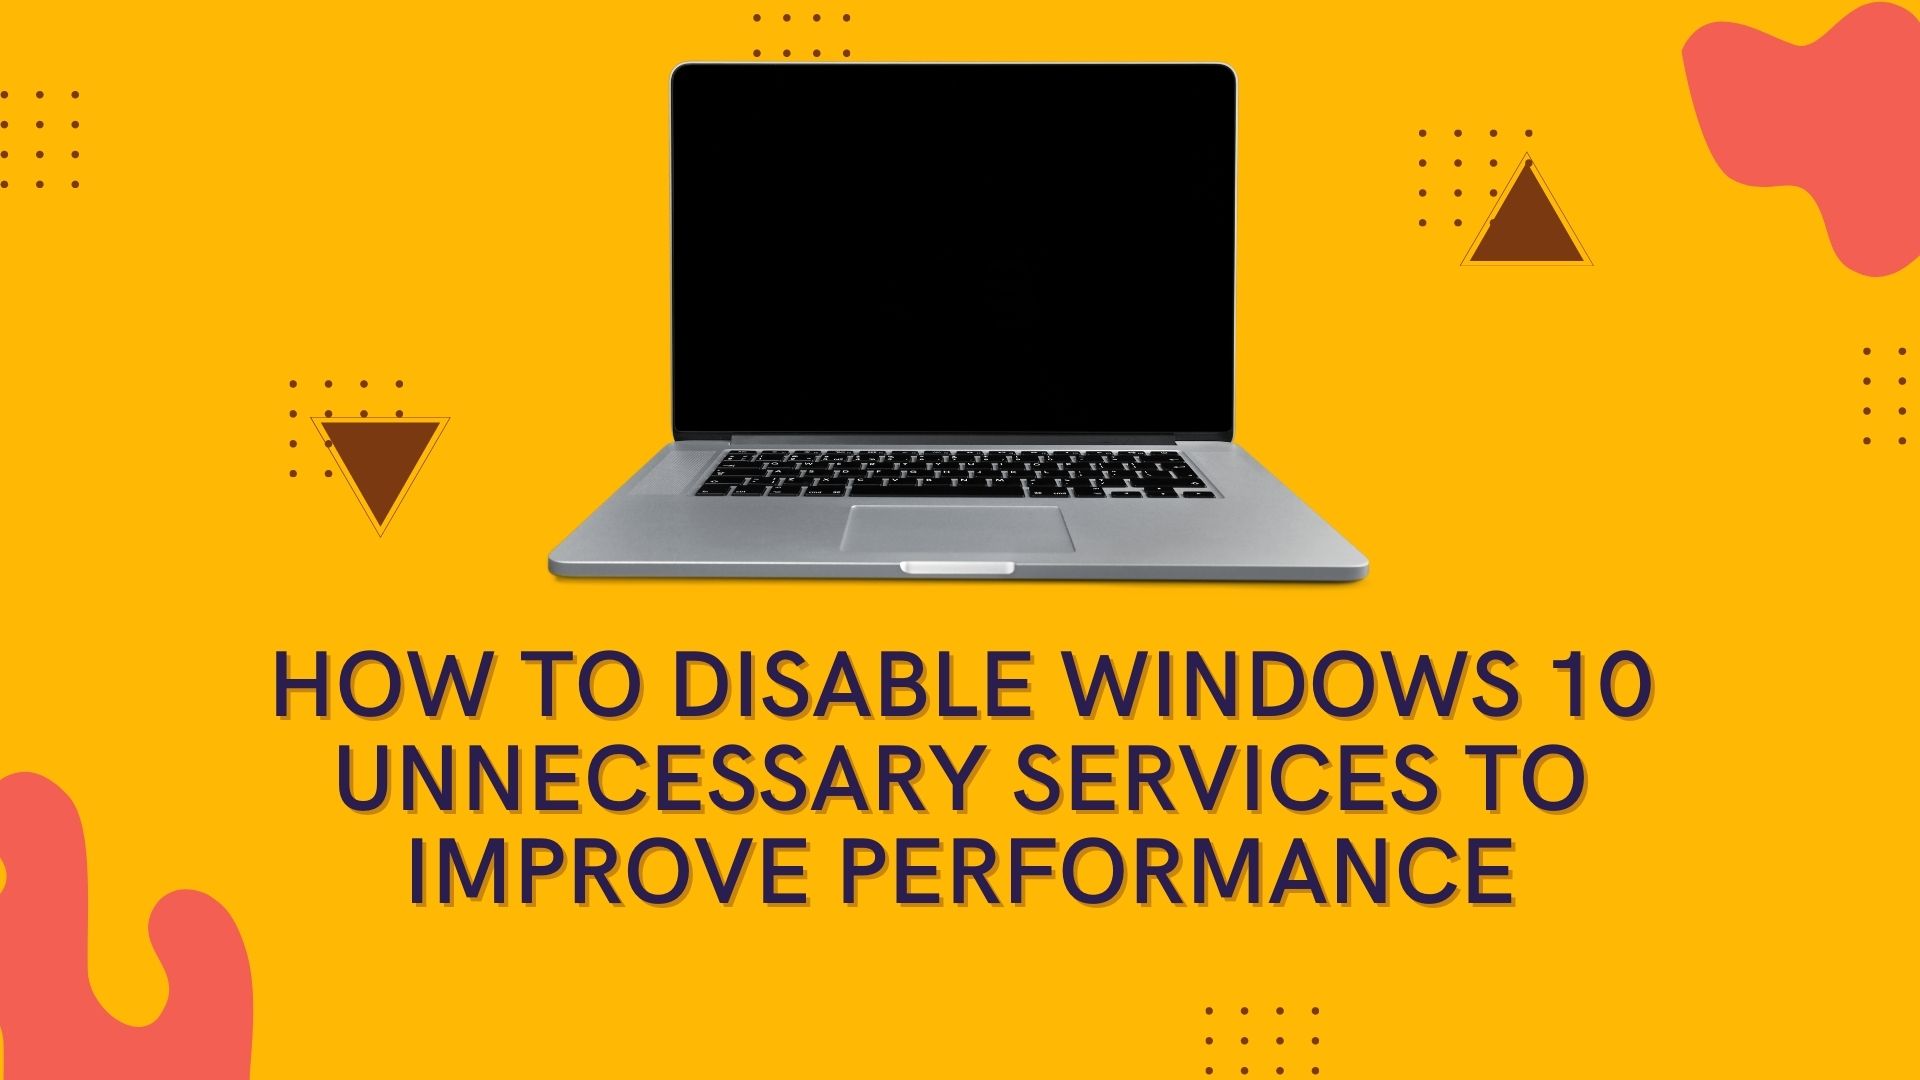 How to Disable Windows 10 Unnecessary Services to Improve Performance